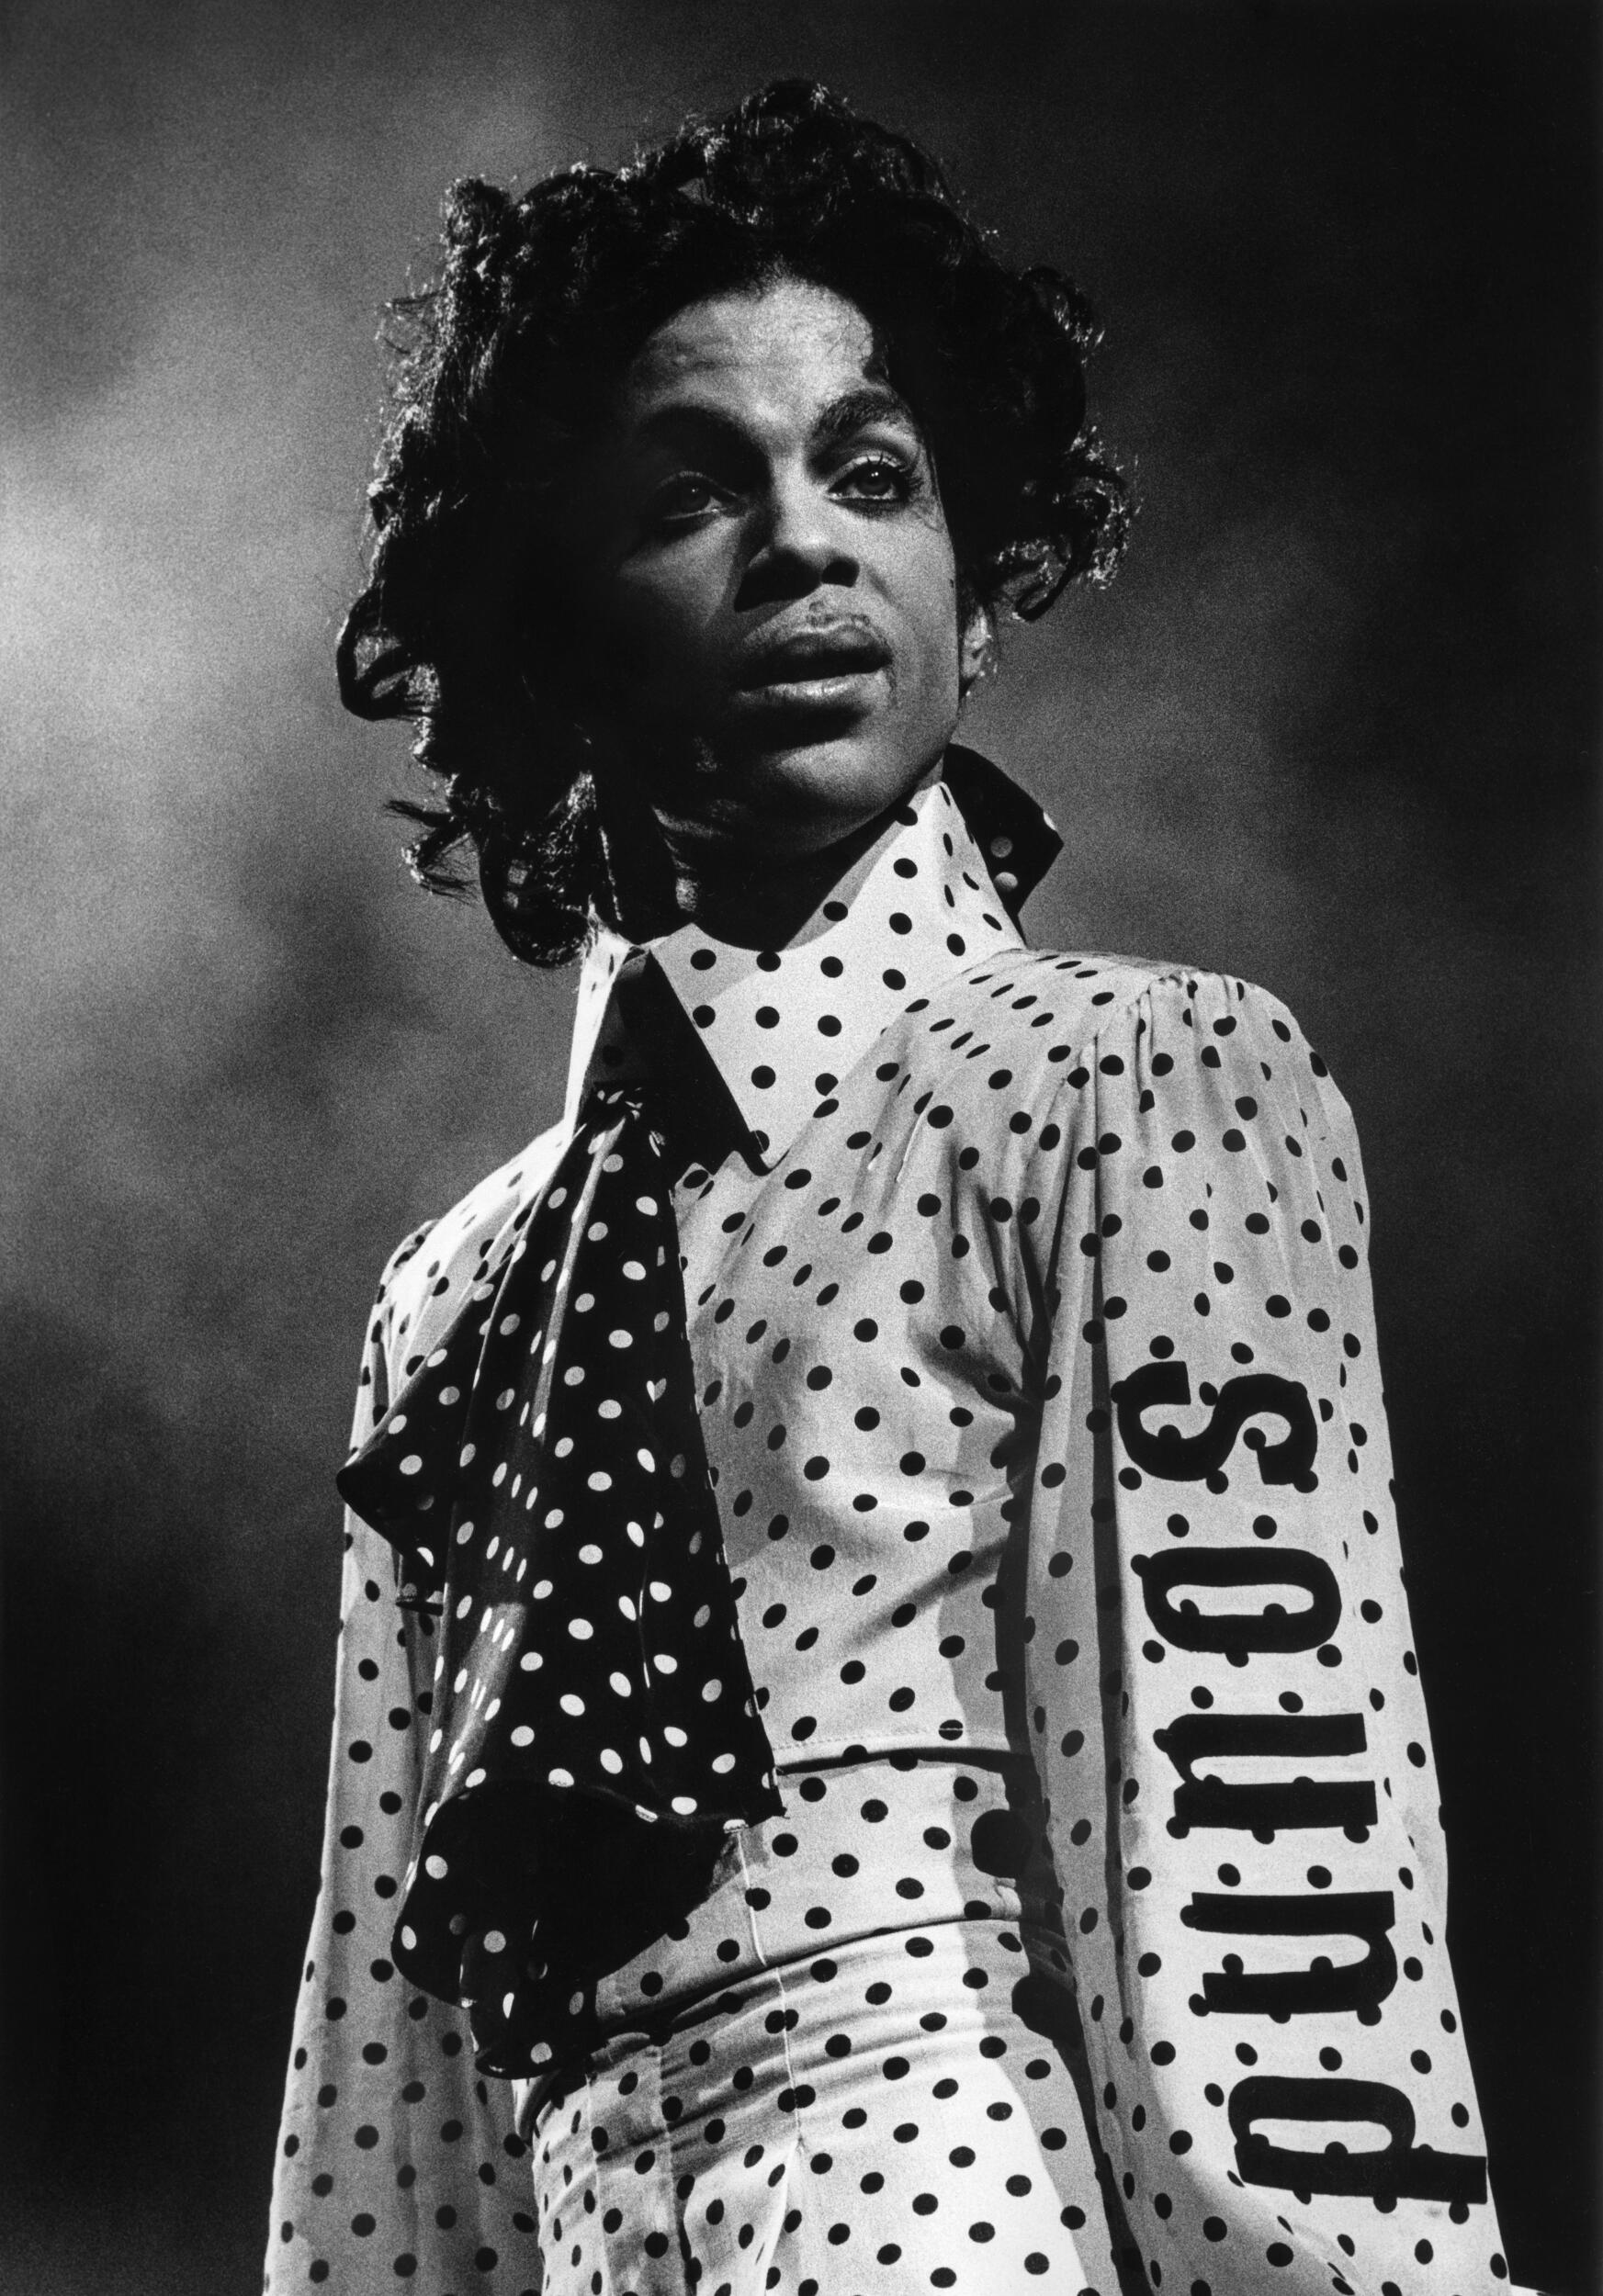 A portait of the Singer Prince 